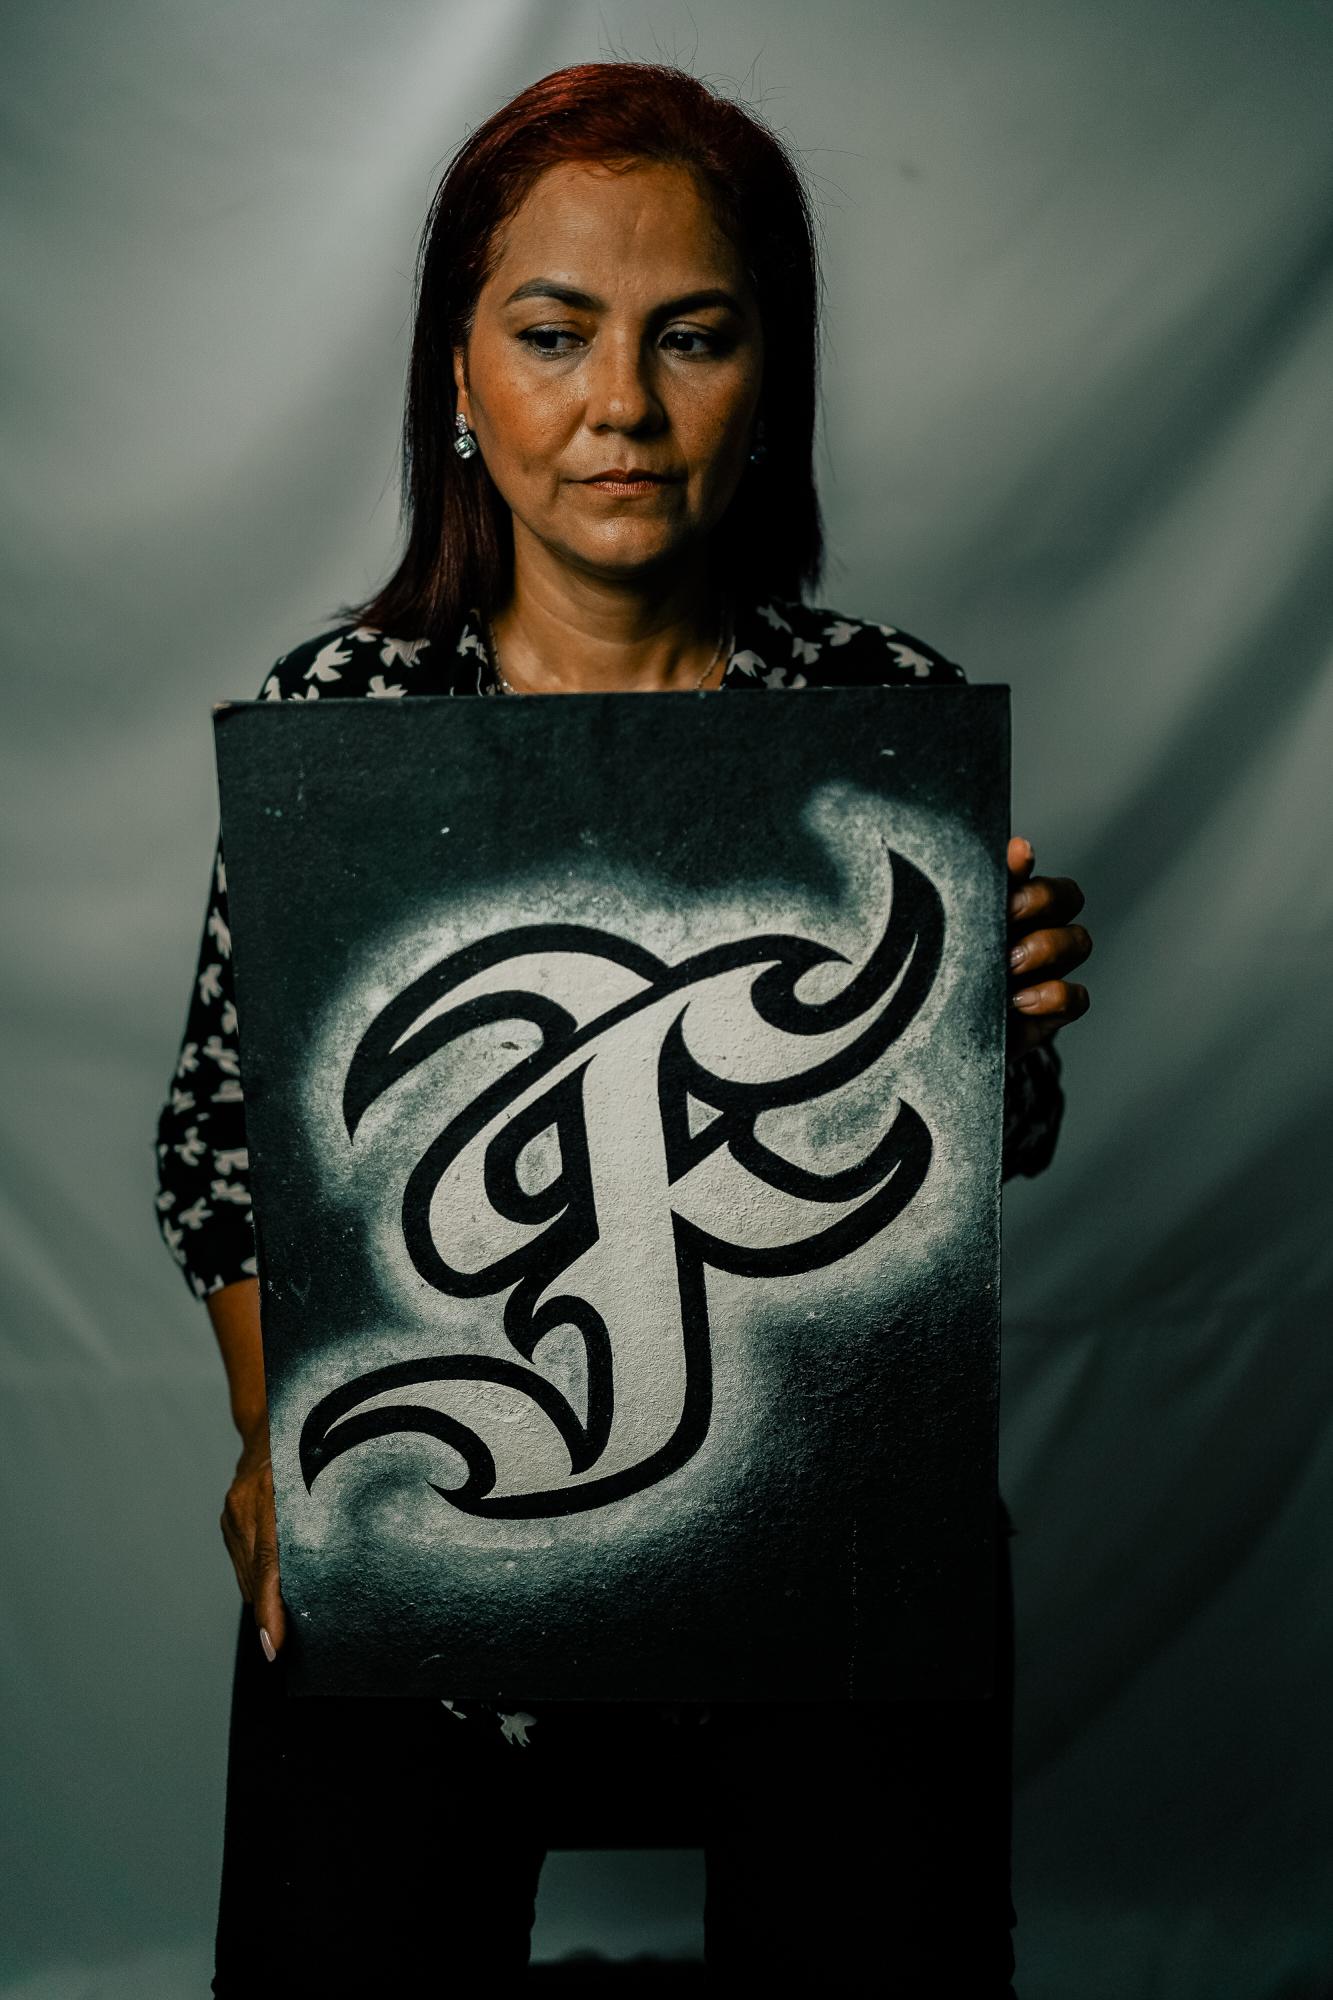 The Washington Post: Resistencia  - Laura poses with a sign that says “F”, for “Flex.”  Laura’s son, Nicolás Guerrero, was a graffiti...